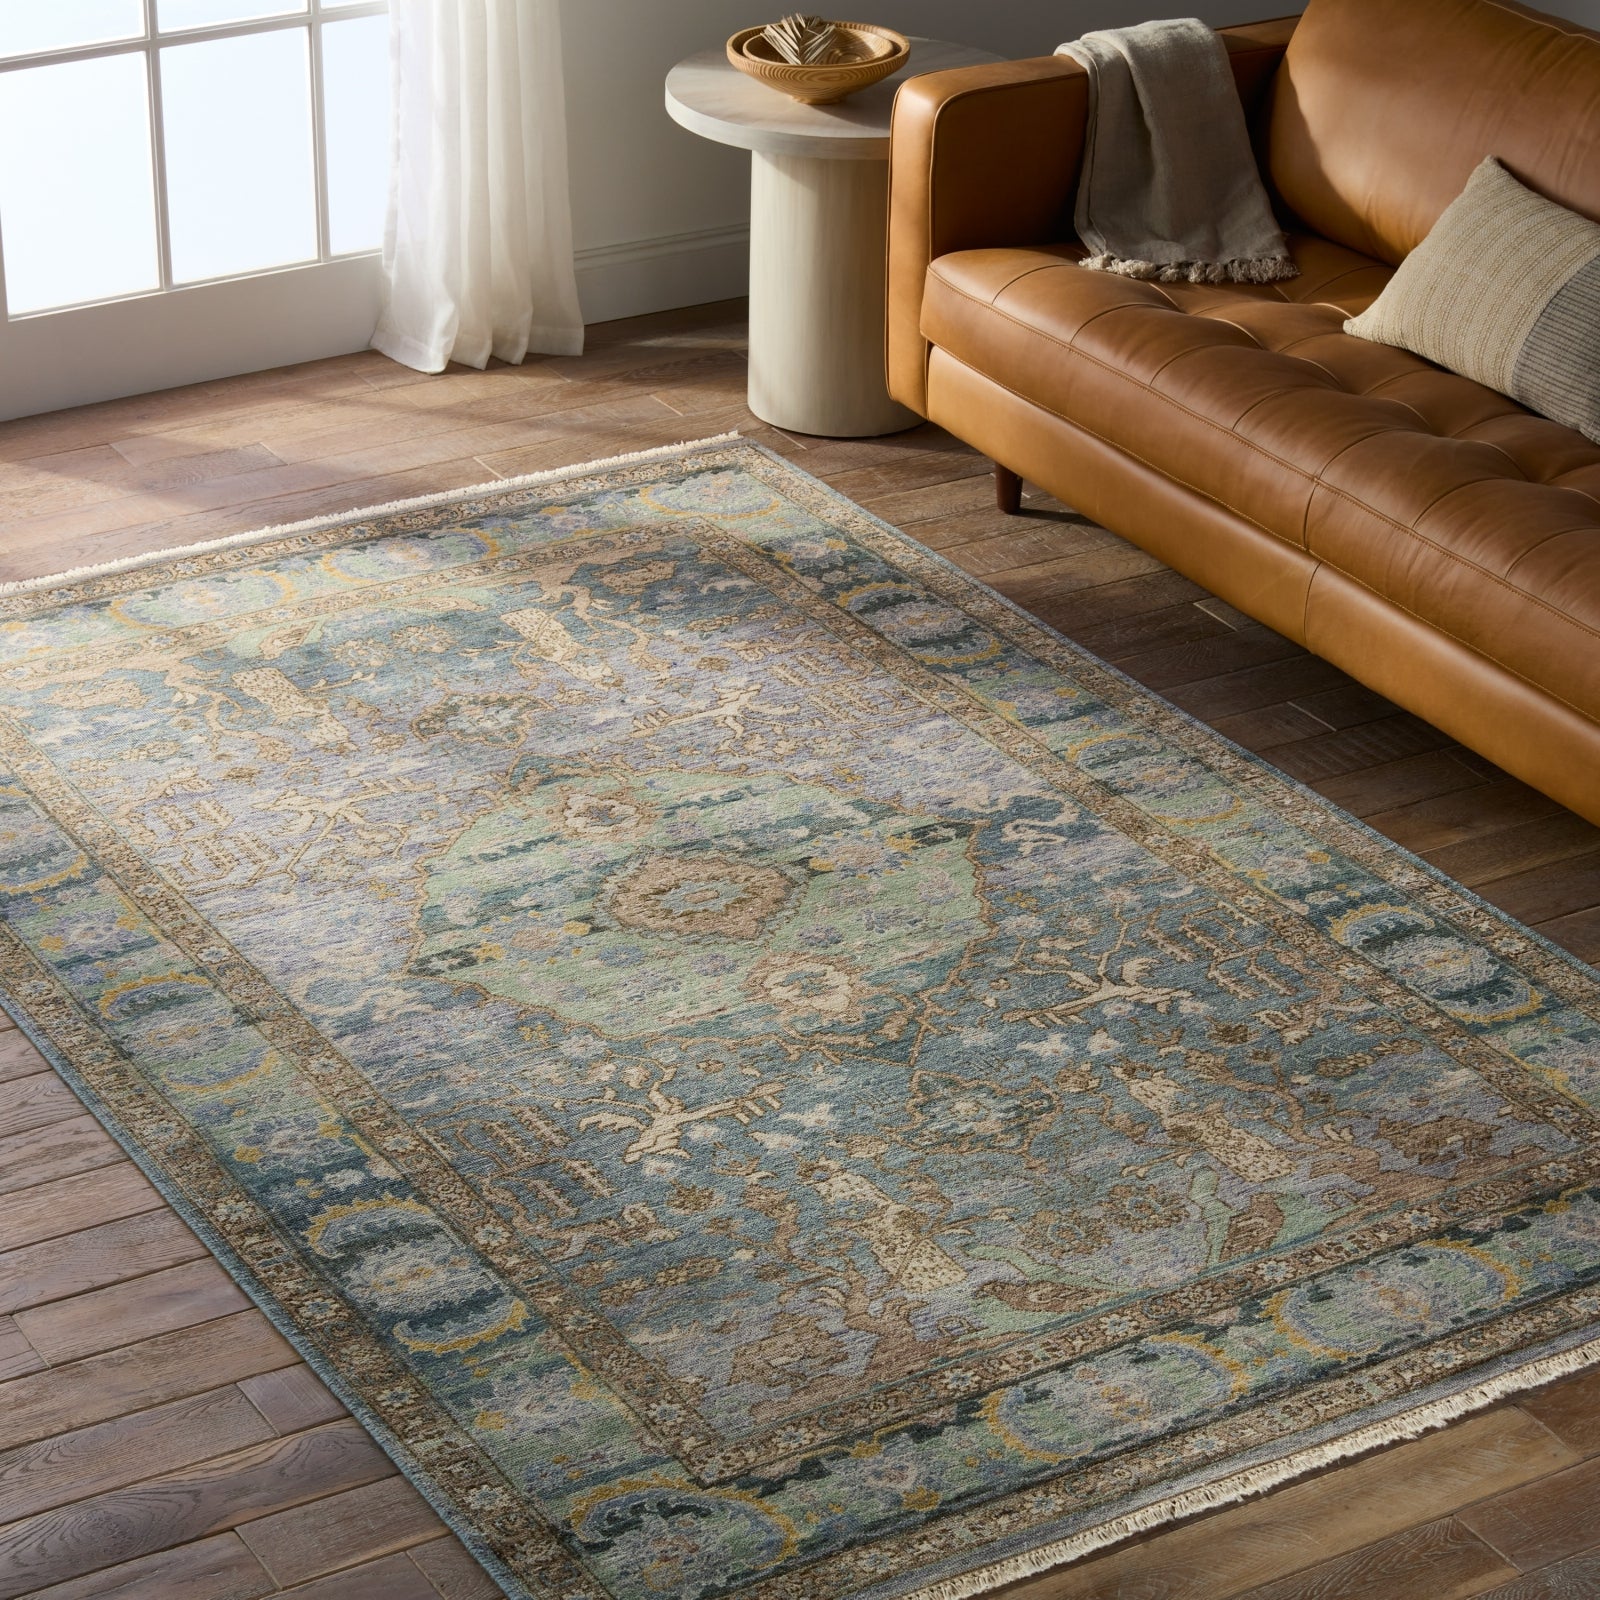 Jaipur Living Someplace In Time Pendulum SPT13 Blue/Gold Area Rug Lifestyle Image Feature